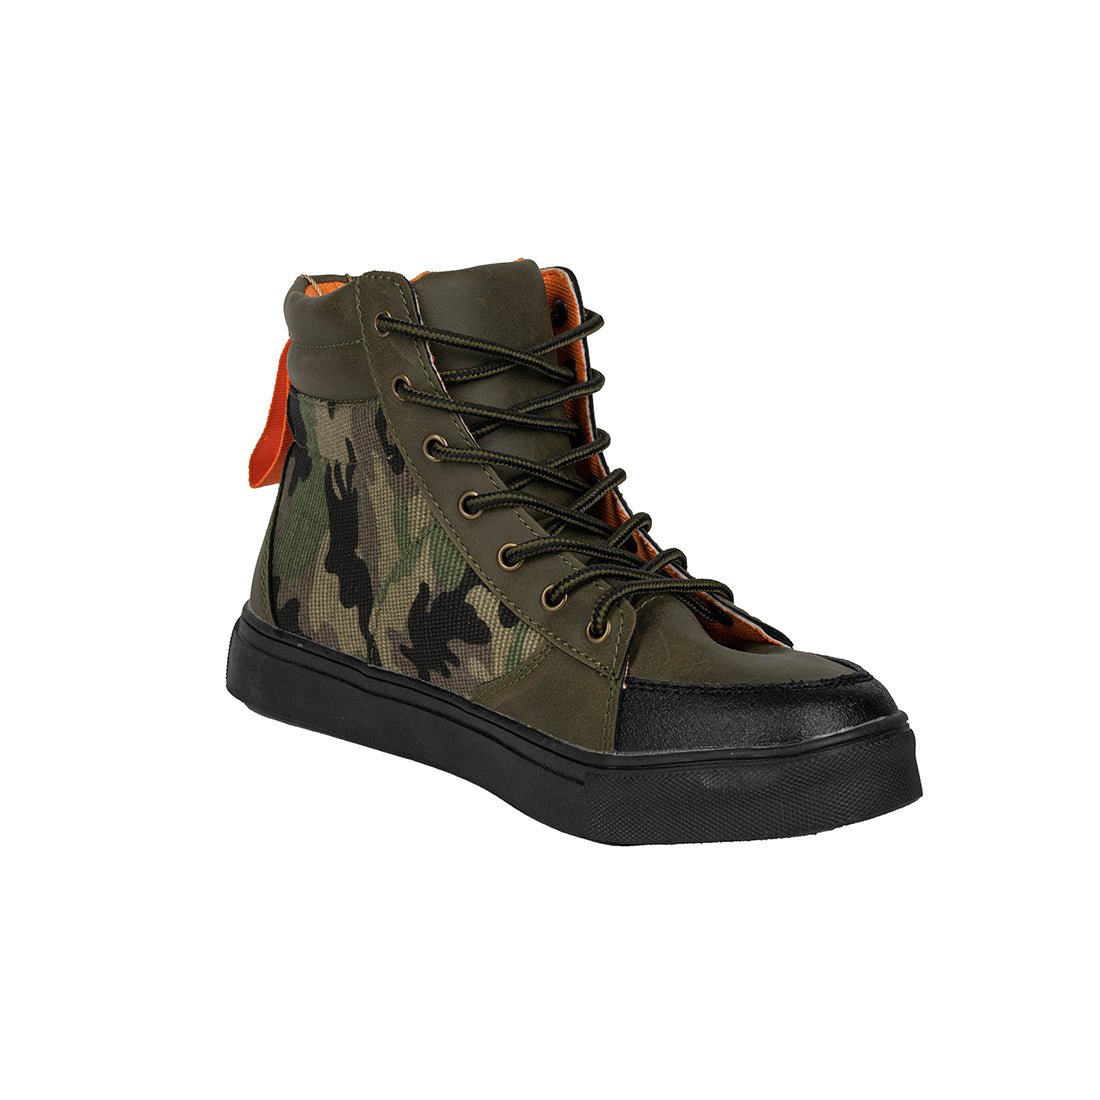 Deer Stags Brand New Shoes For Boys - mymadstore.com